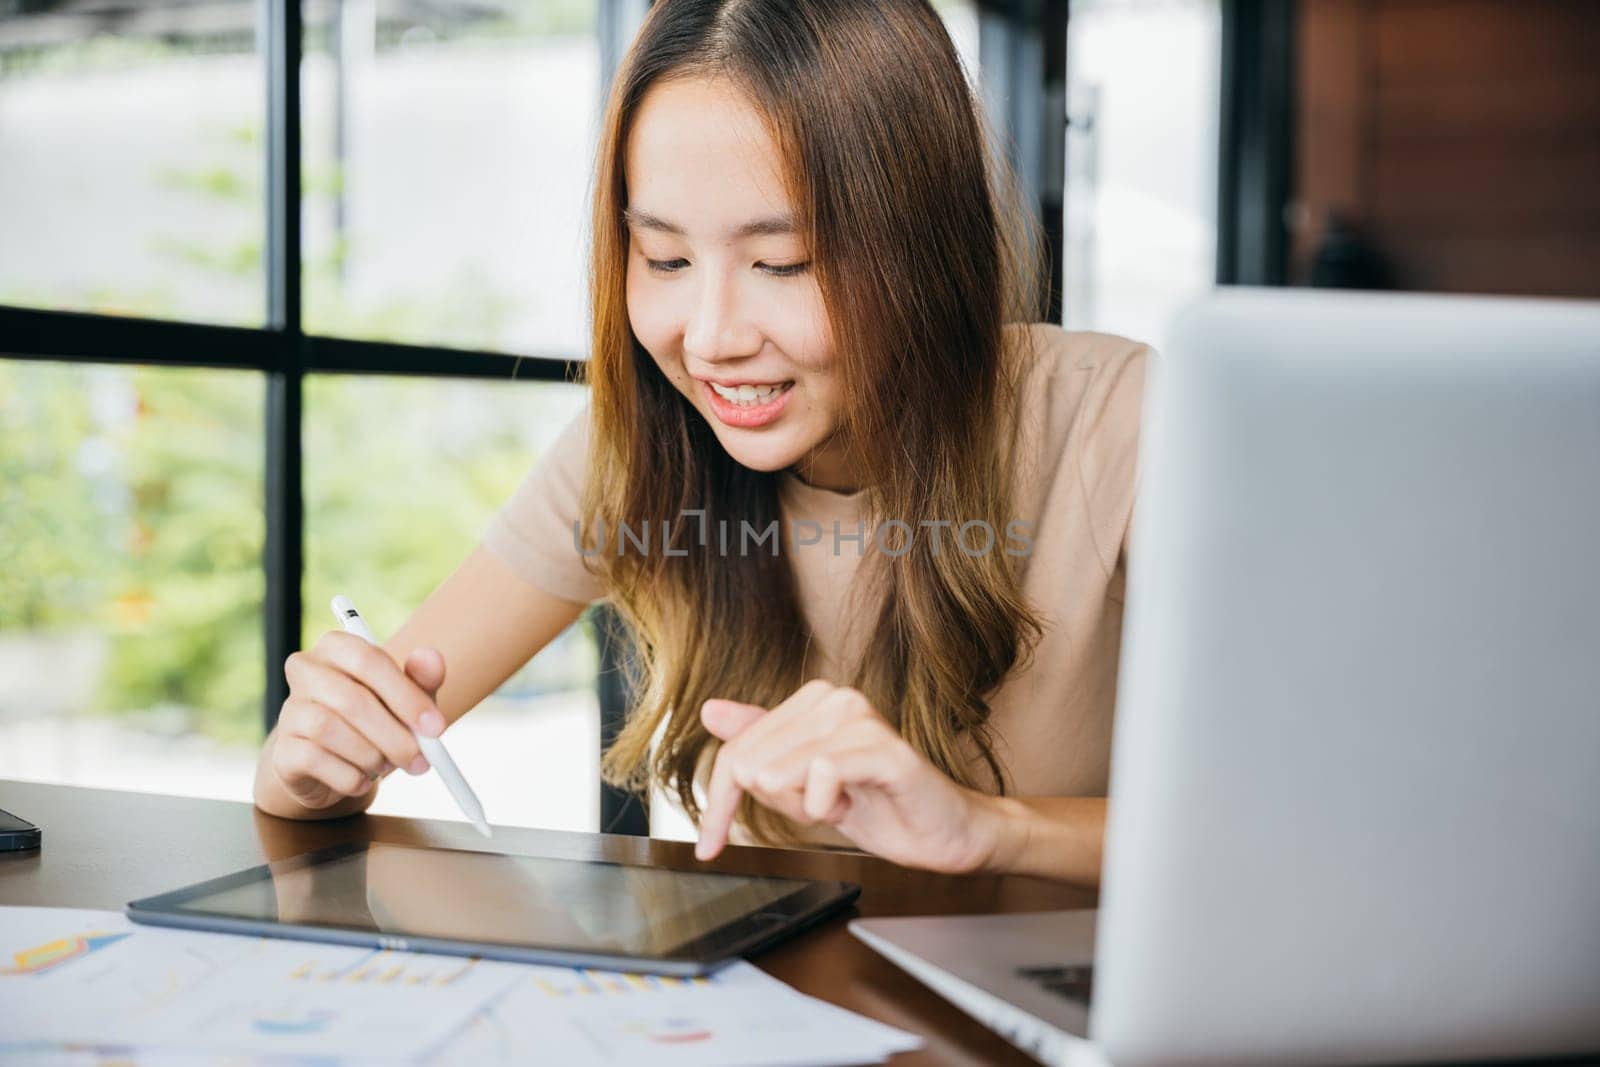 Smiling woman freelance artistic draw on screen, Lifestyle artist creative work painting drawing on touch pad digital tablet with stylus pen at cafe coffee shop, designer working online